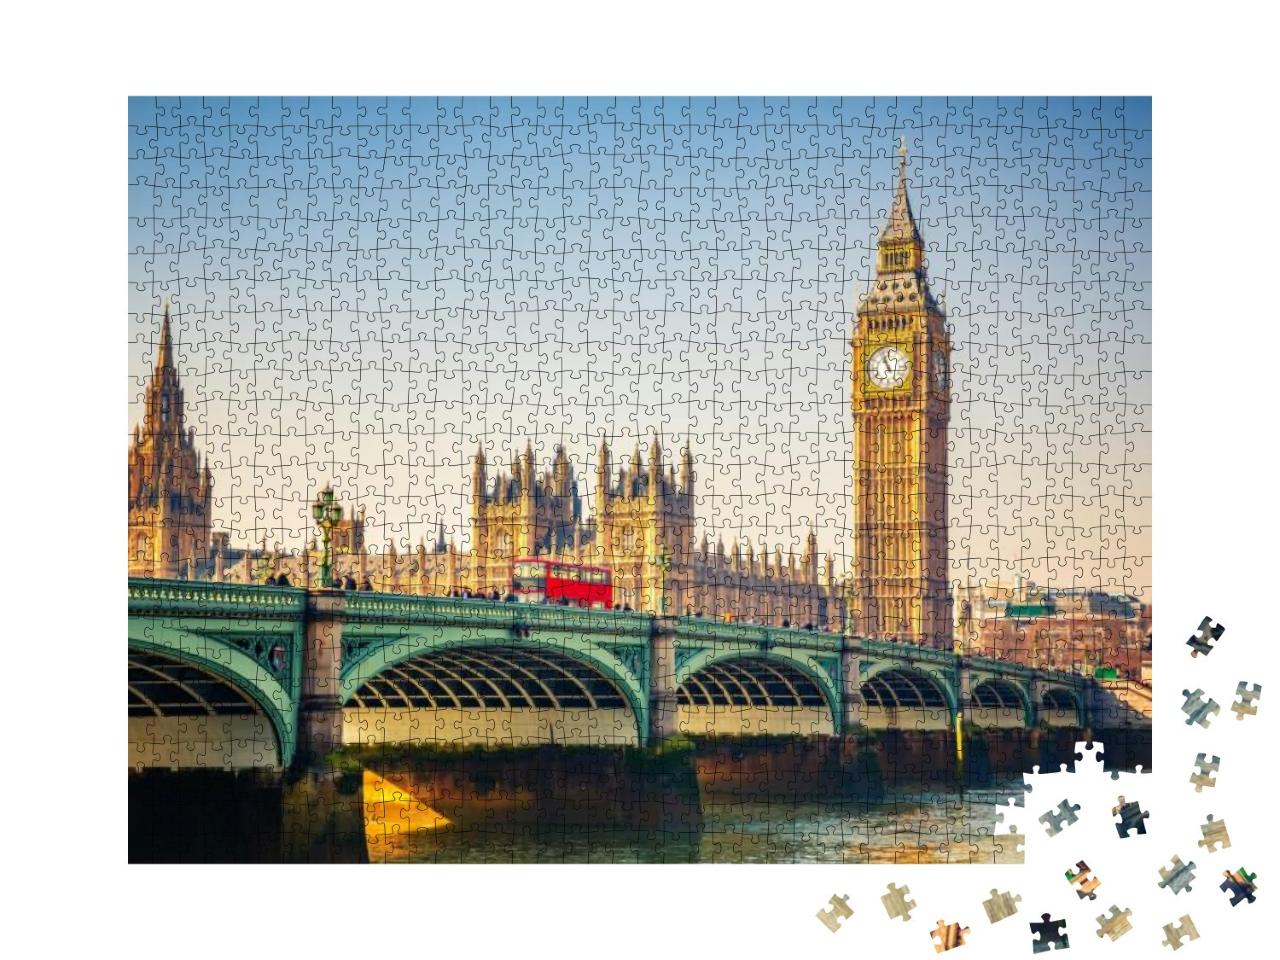 Big Ben & Westminster Bridge in London... Jigsaw Puzzle with 1000 pieces